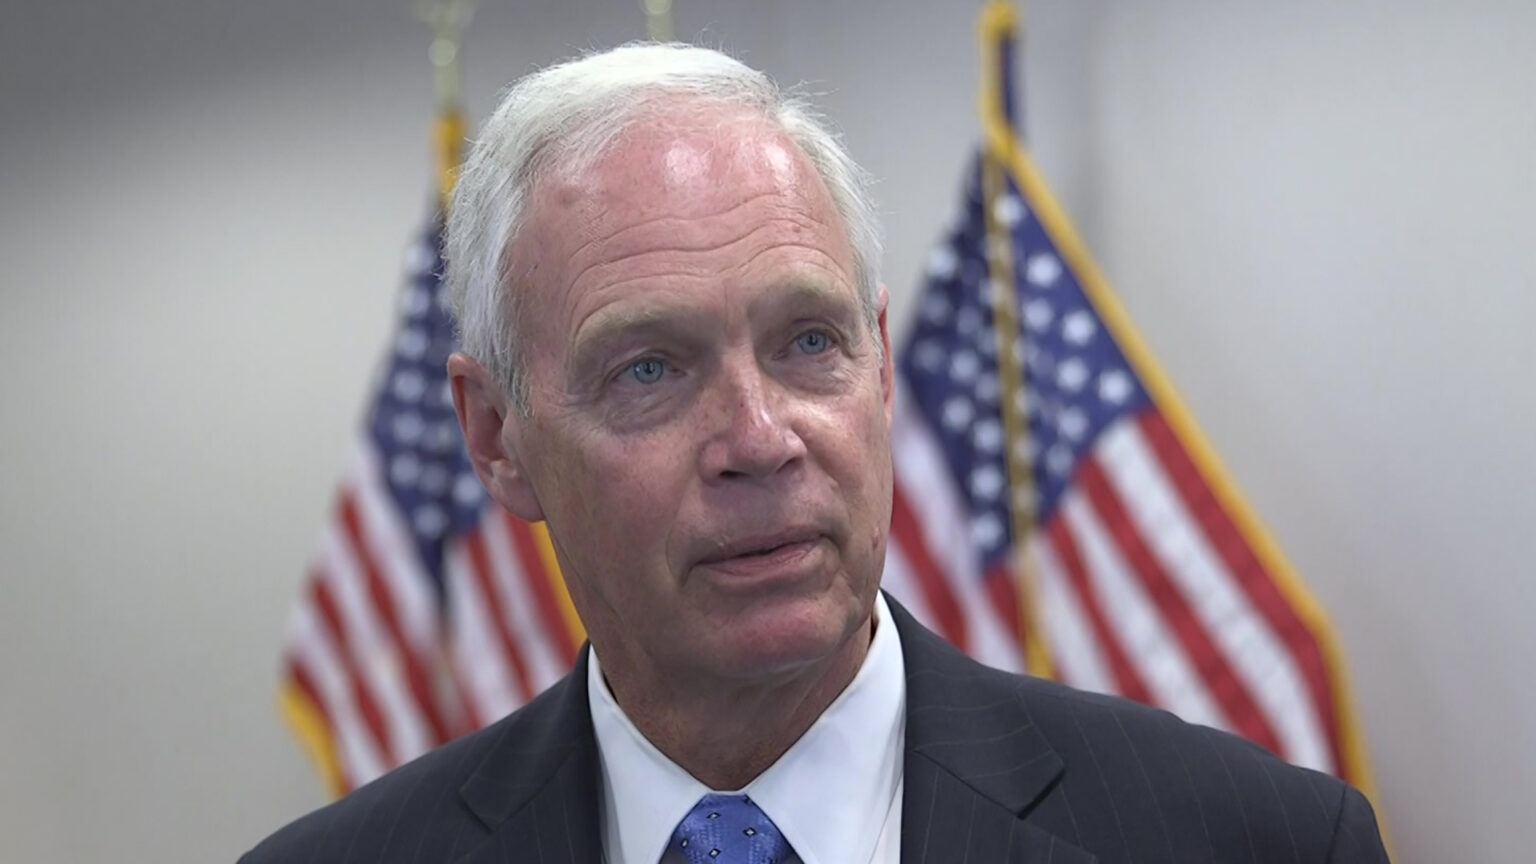 Ron Johnson speaks in a room with flags in the background.